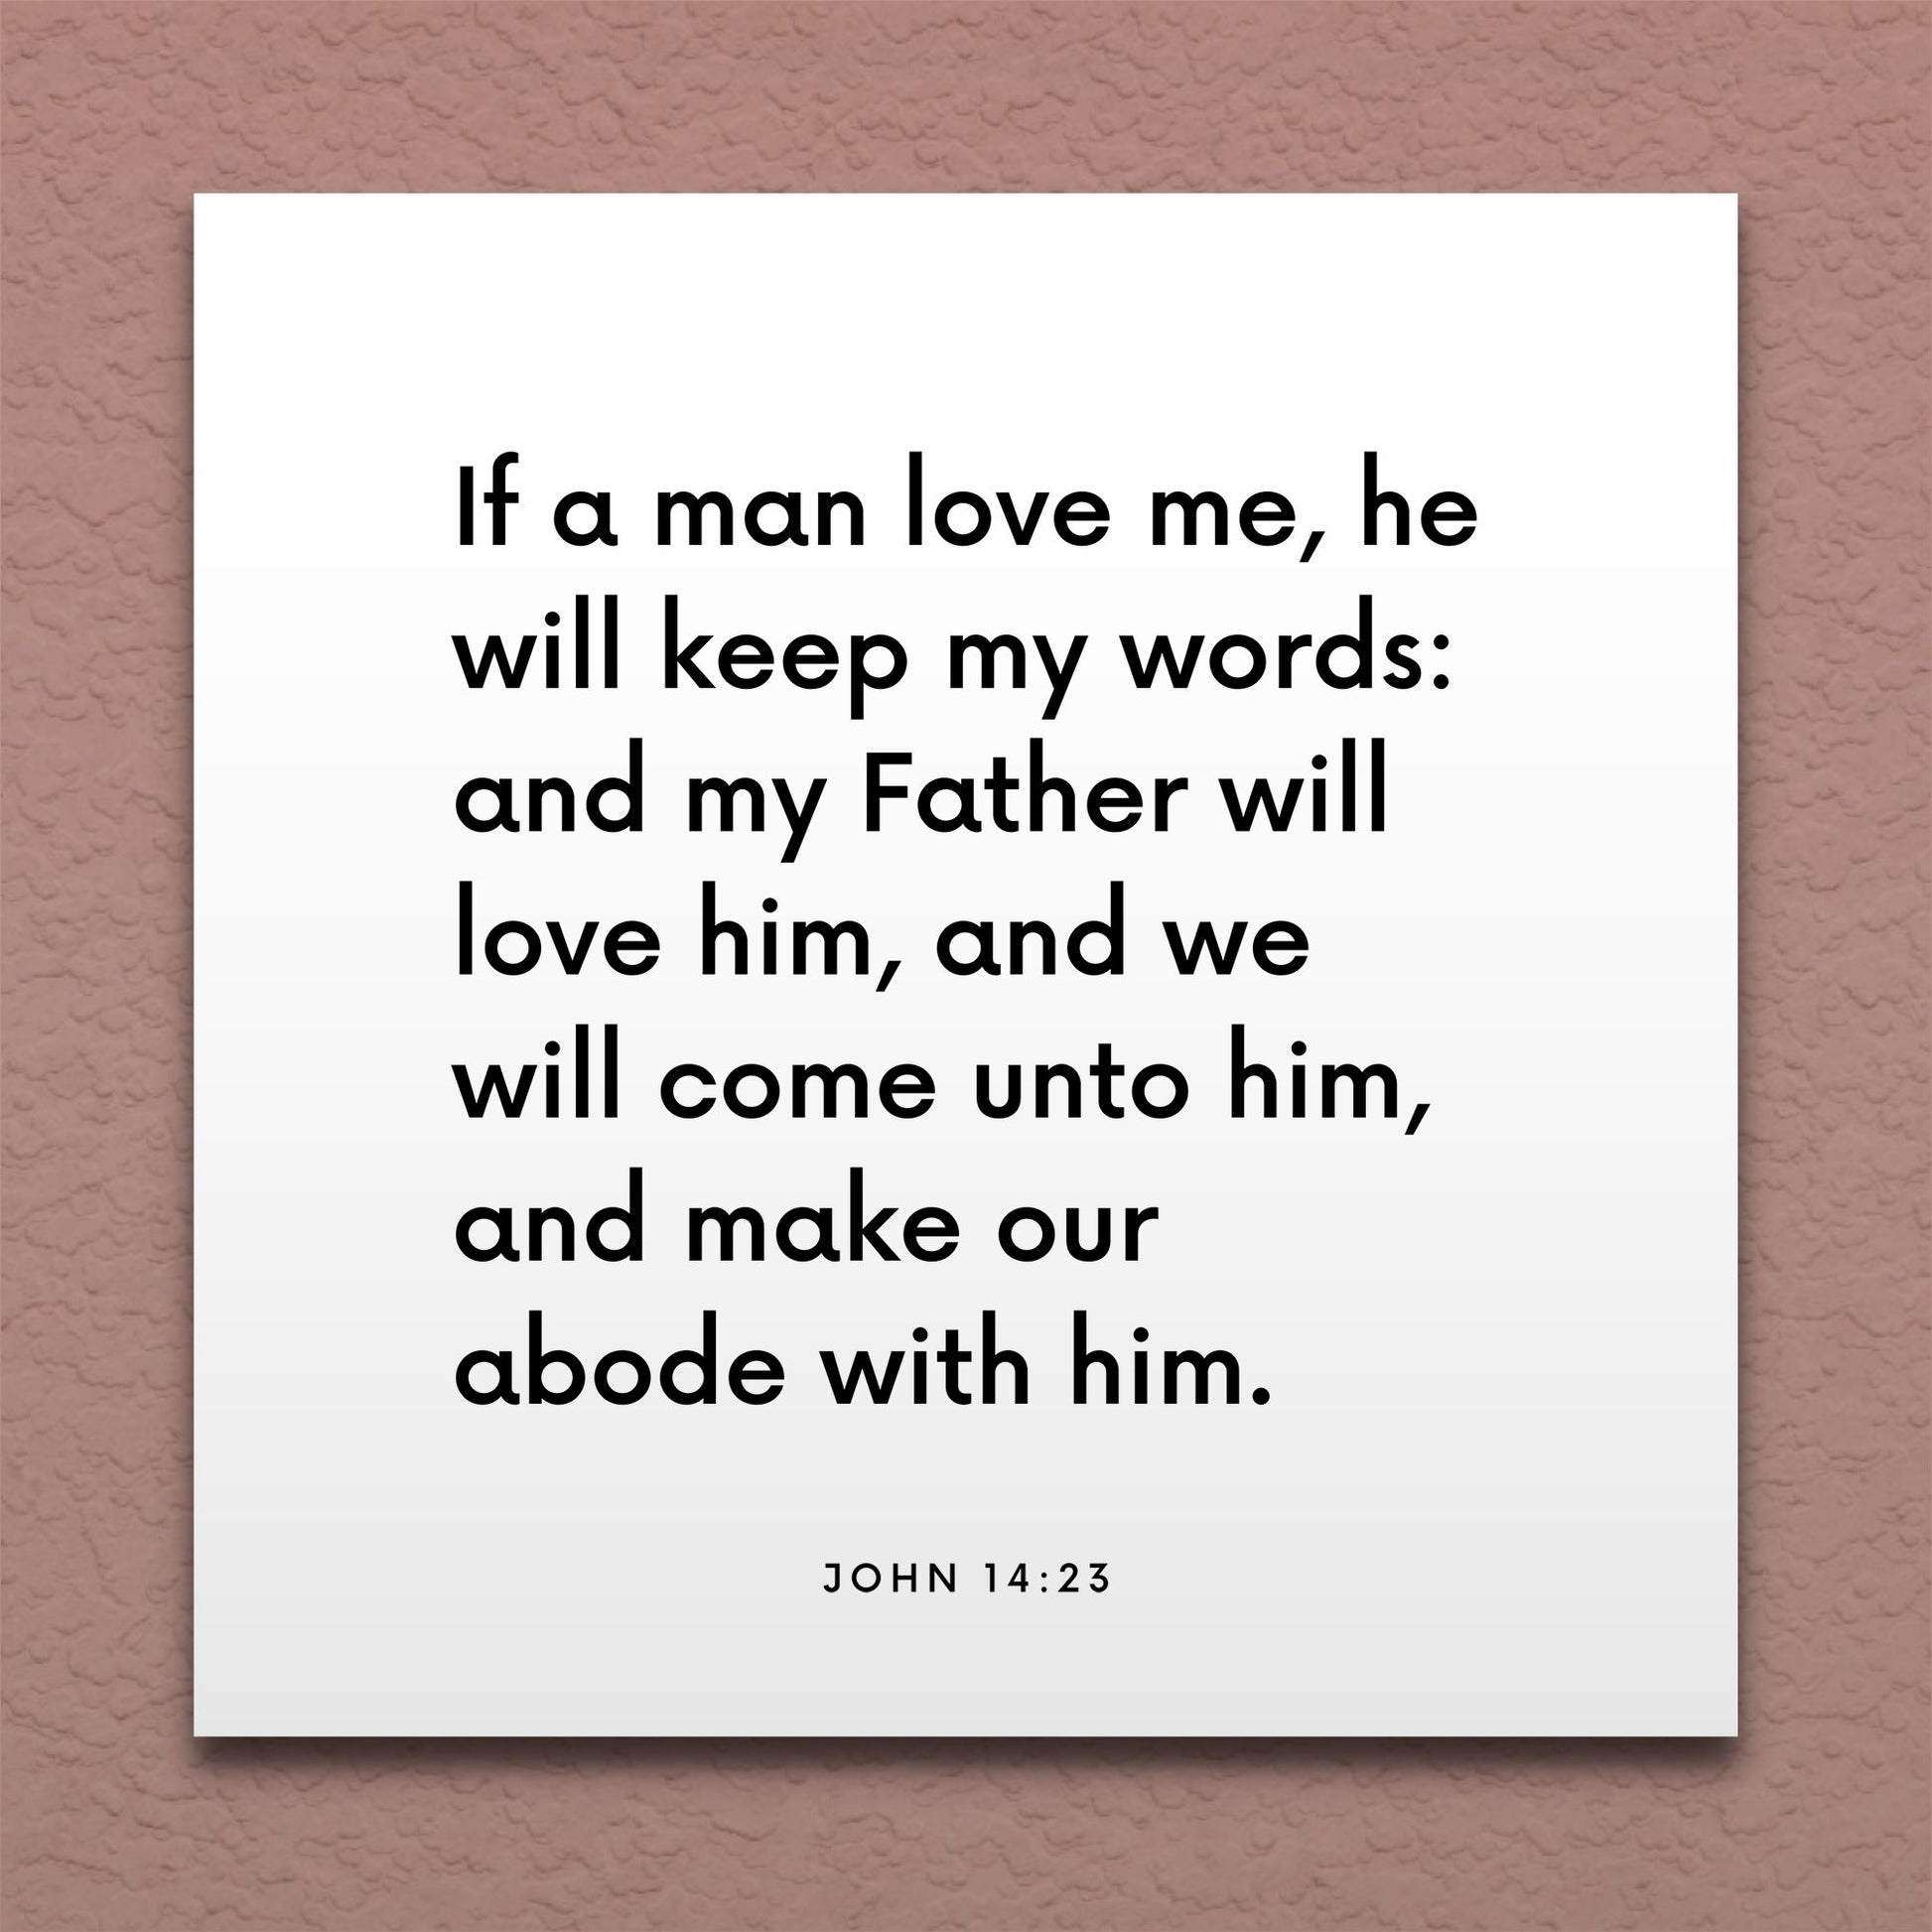 Wall-mounted scripture tile for John 14:23 - "If a man love me, he will keep my words"